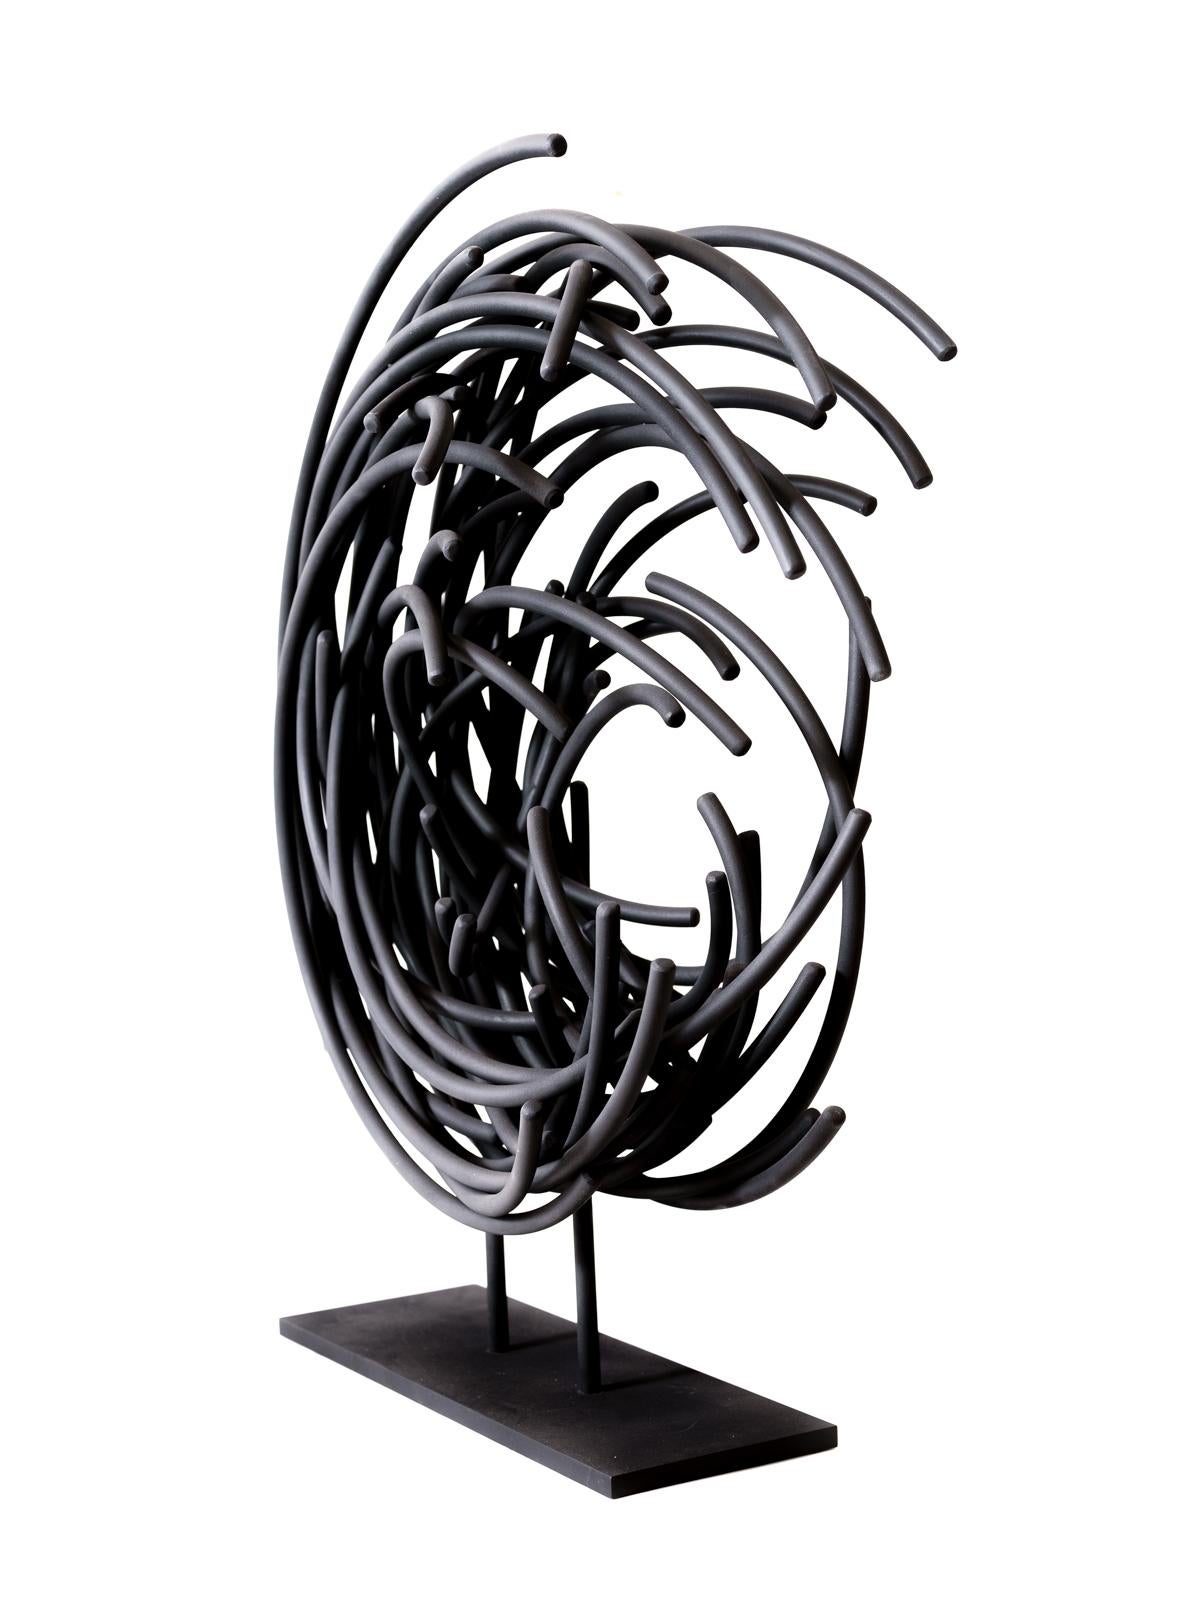 Maelstrom Series No 4 - layered, intersecting, forged aluminum sculpture - Sculpture by Shayne Dark